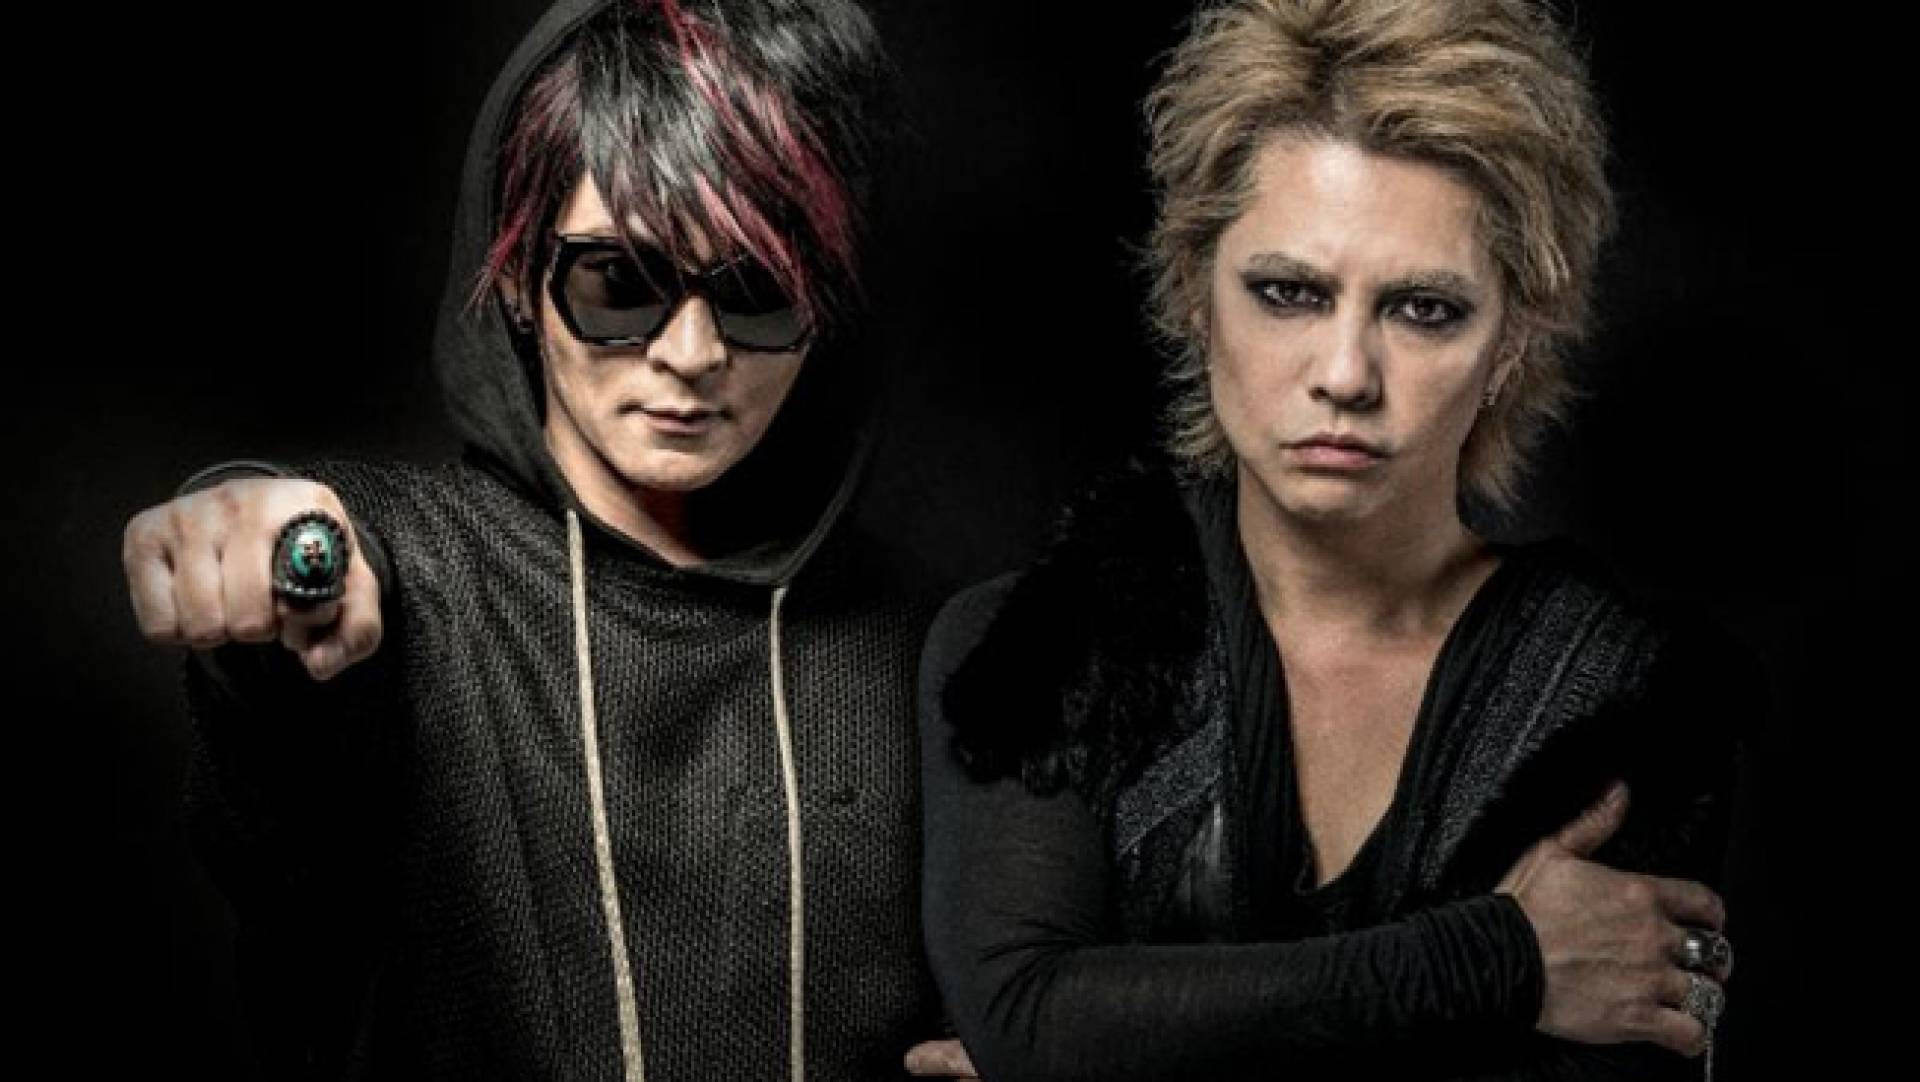 Interview with HYDE from VAMPS